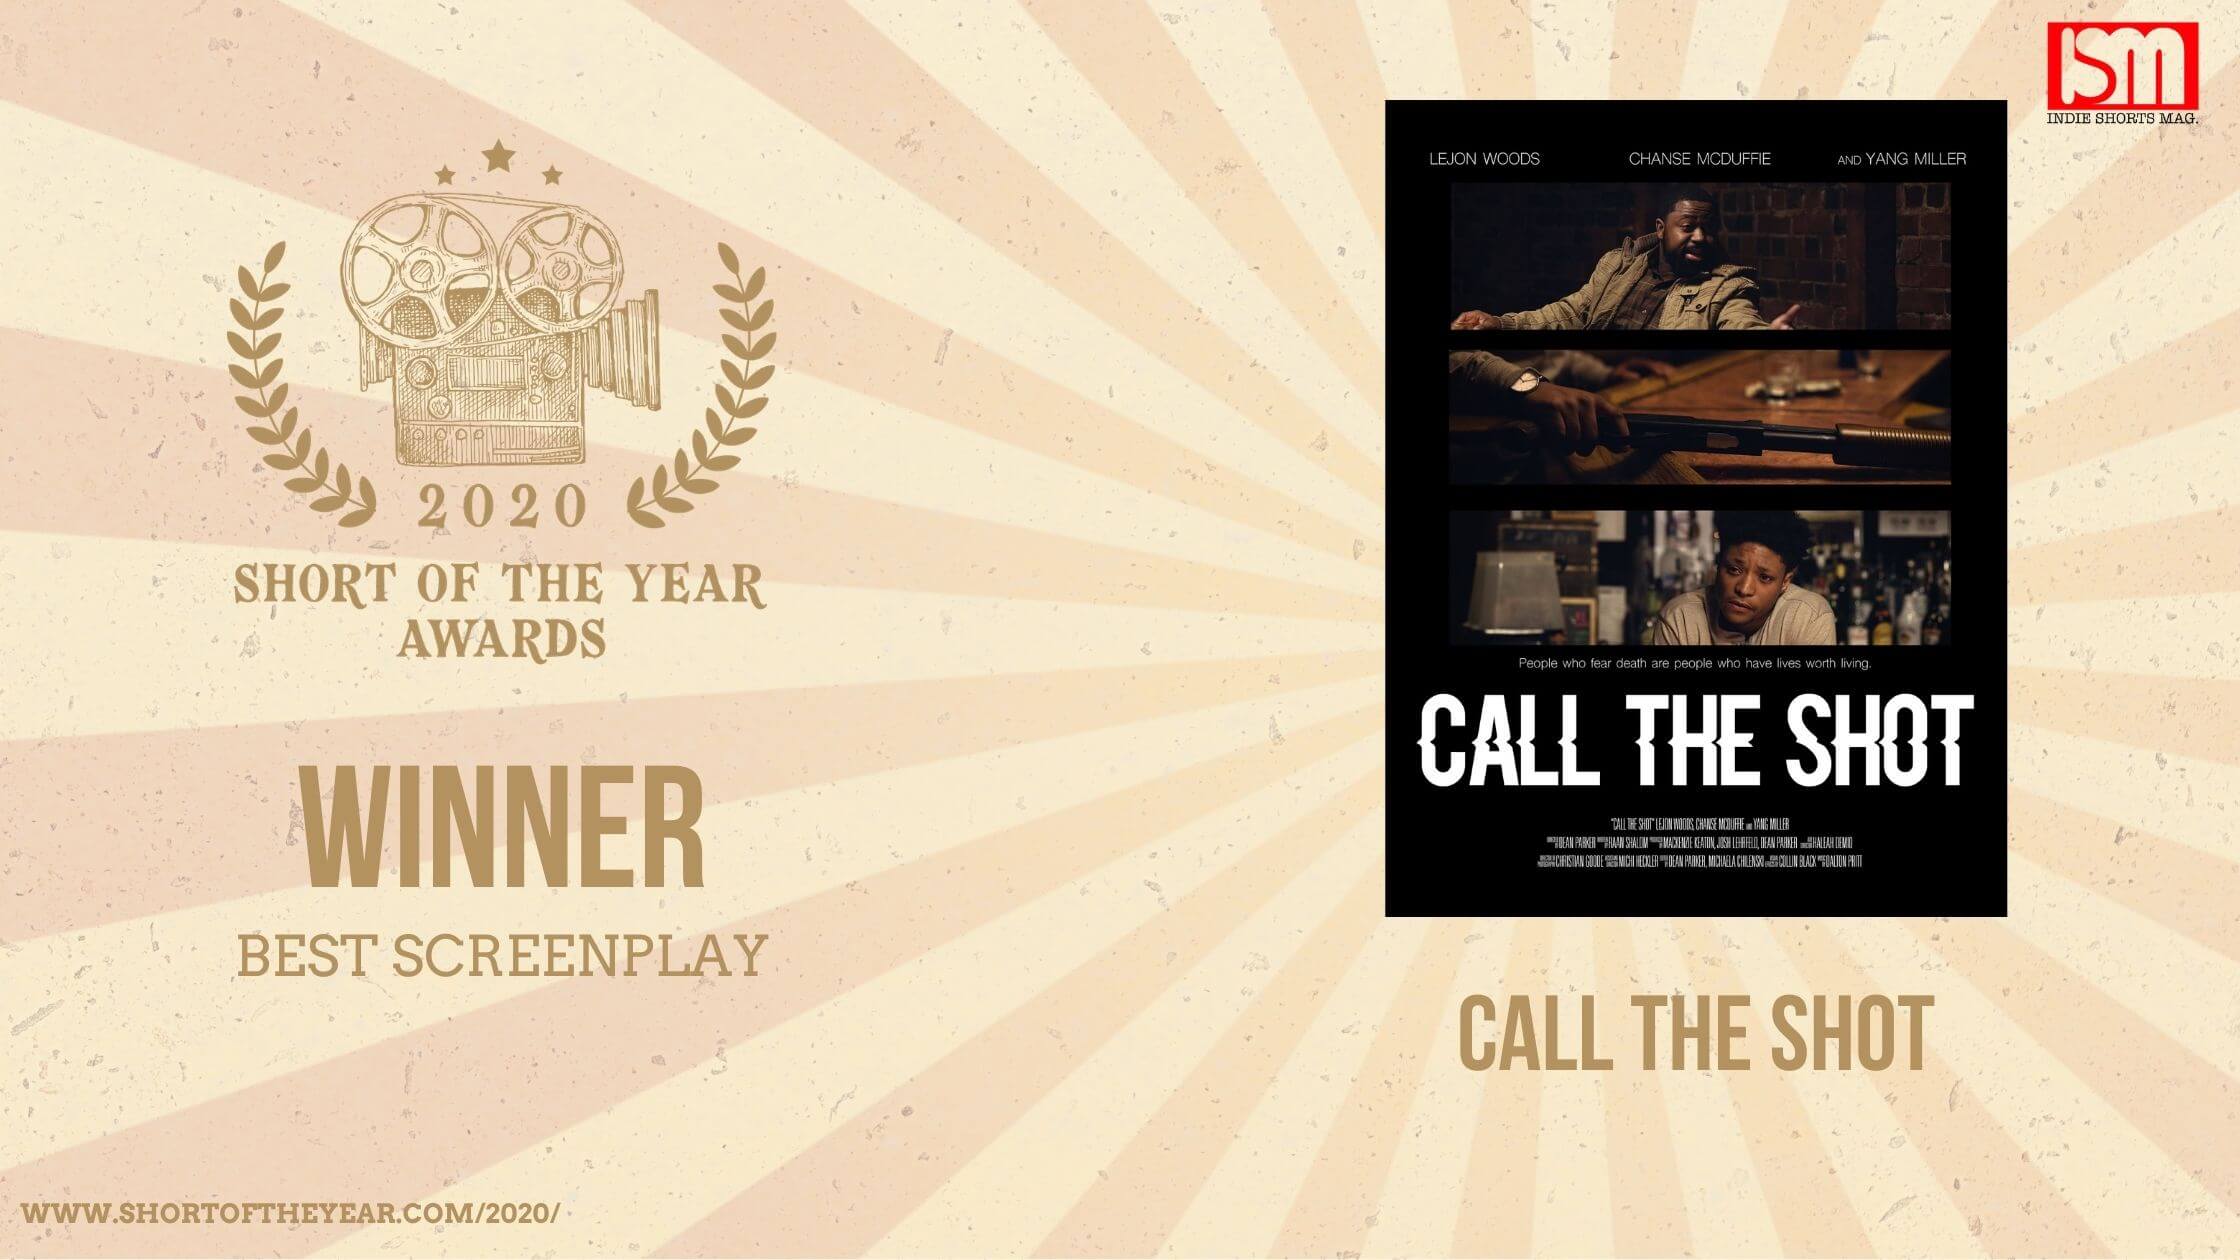 Best Screenplay - Short of the Year Awards 2020